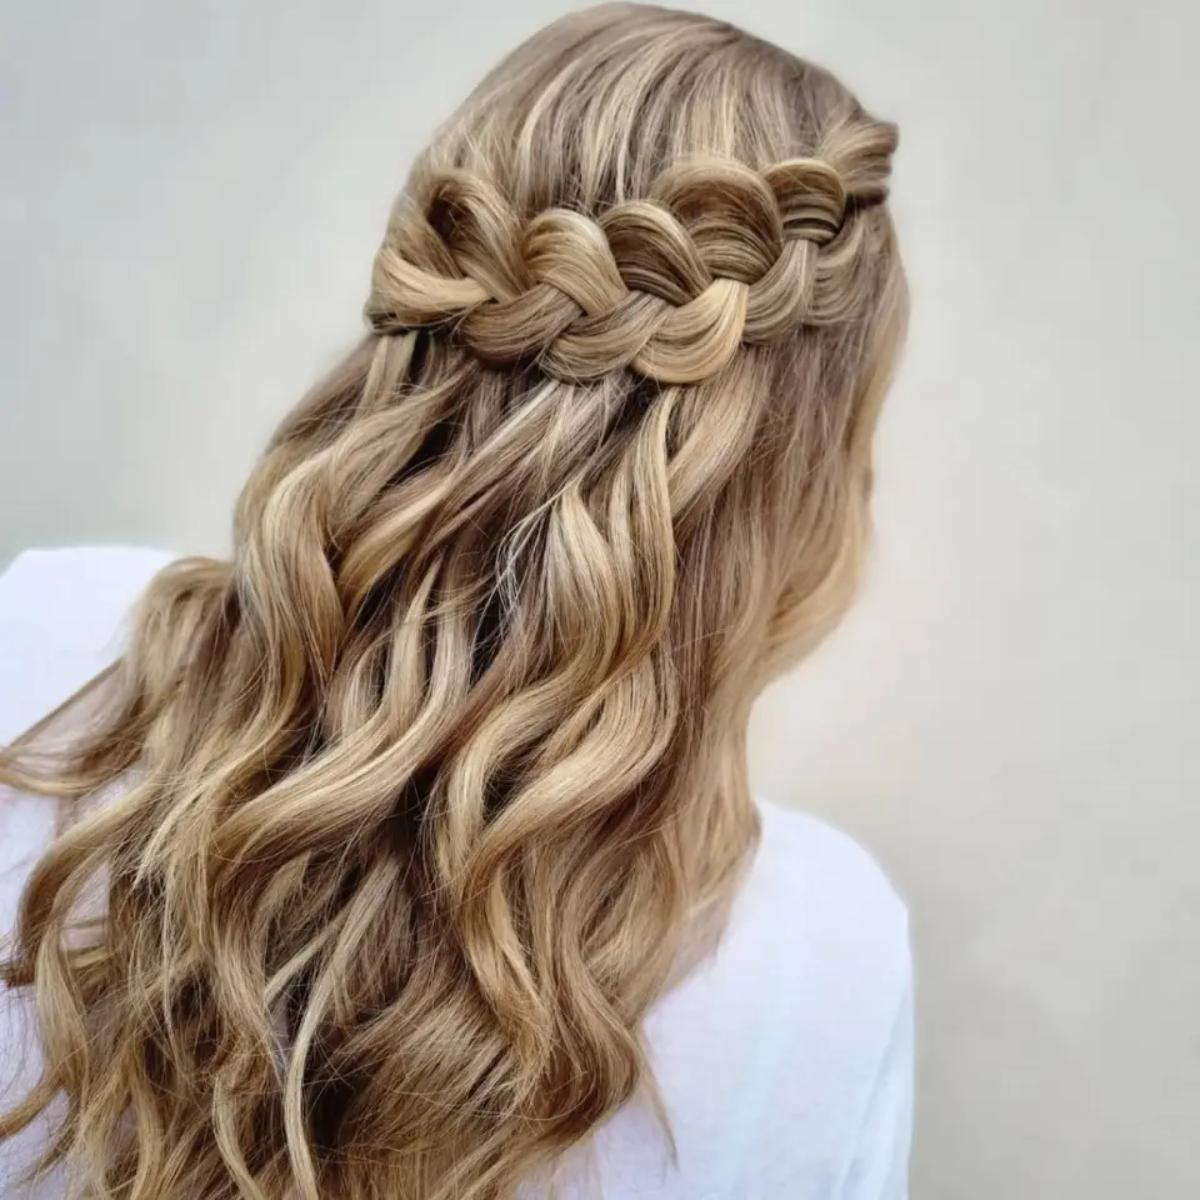 Wedding hairstyles for long hair: beautiful long hairstyles for brides -  Luxy® Hair